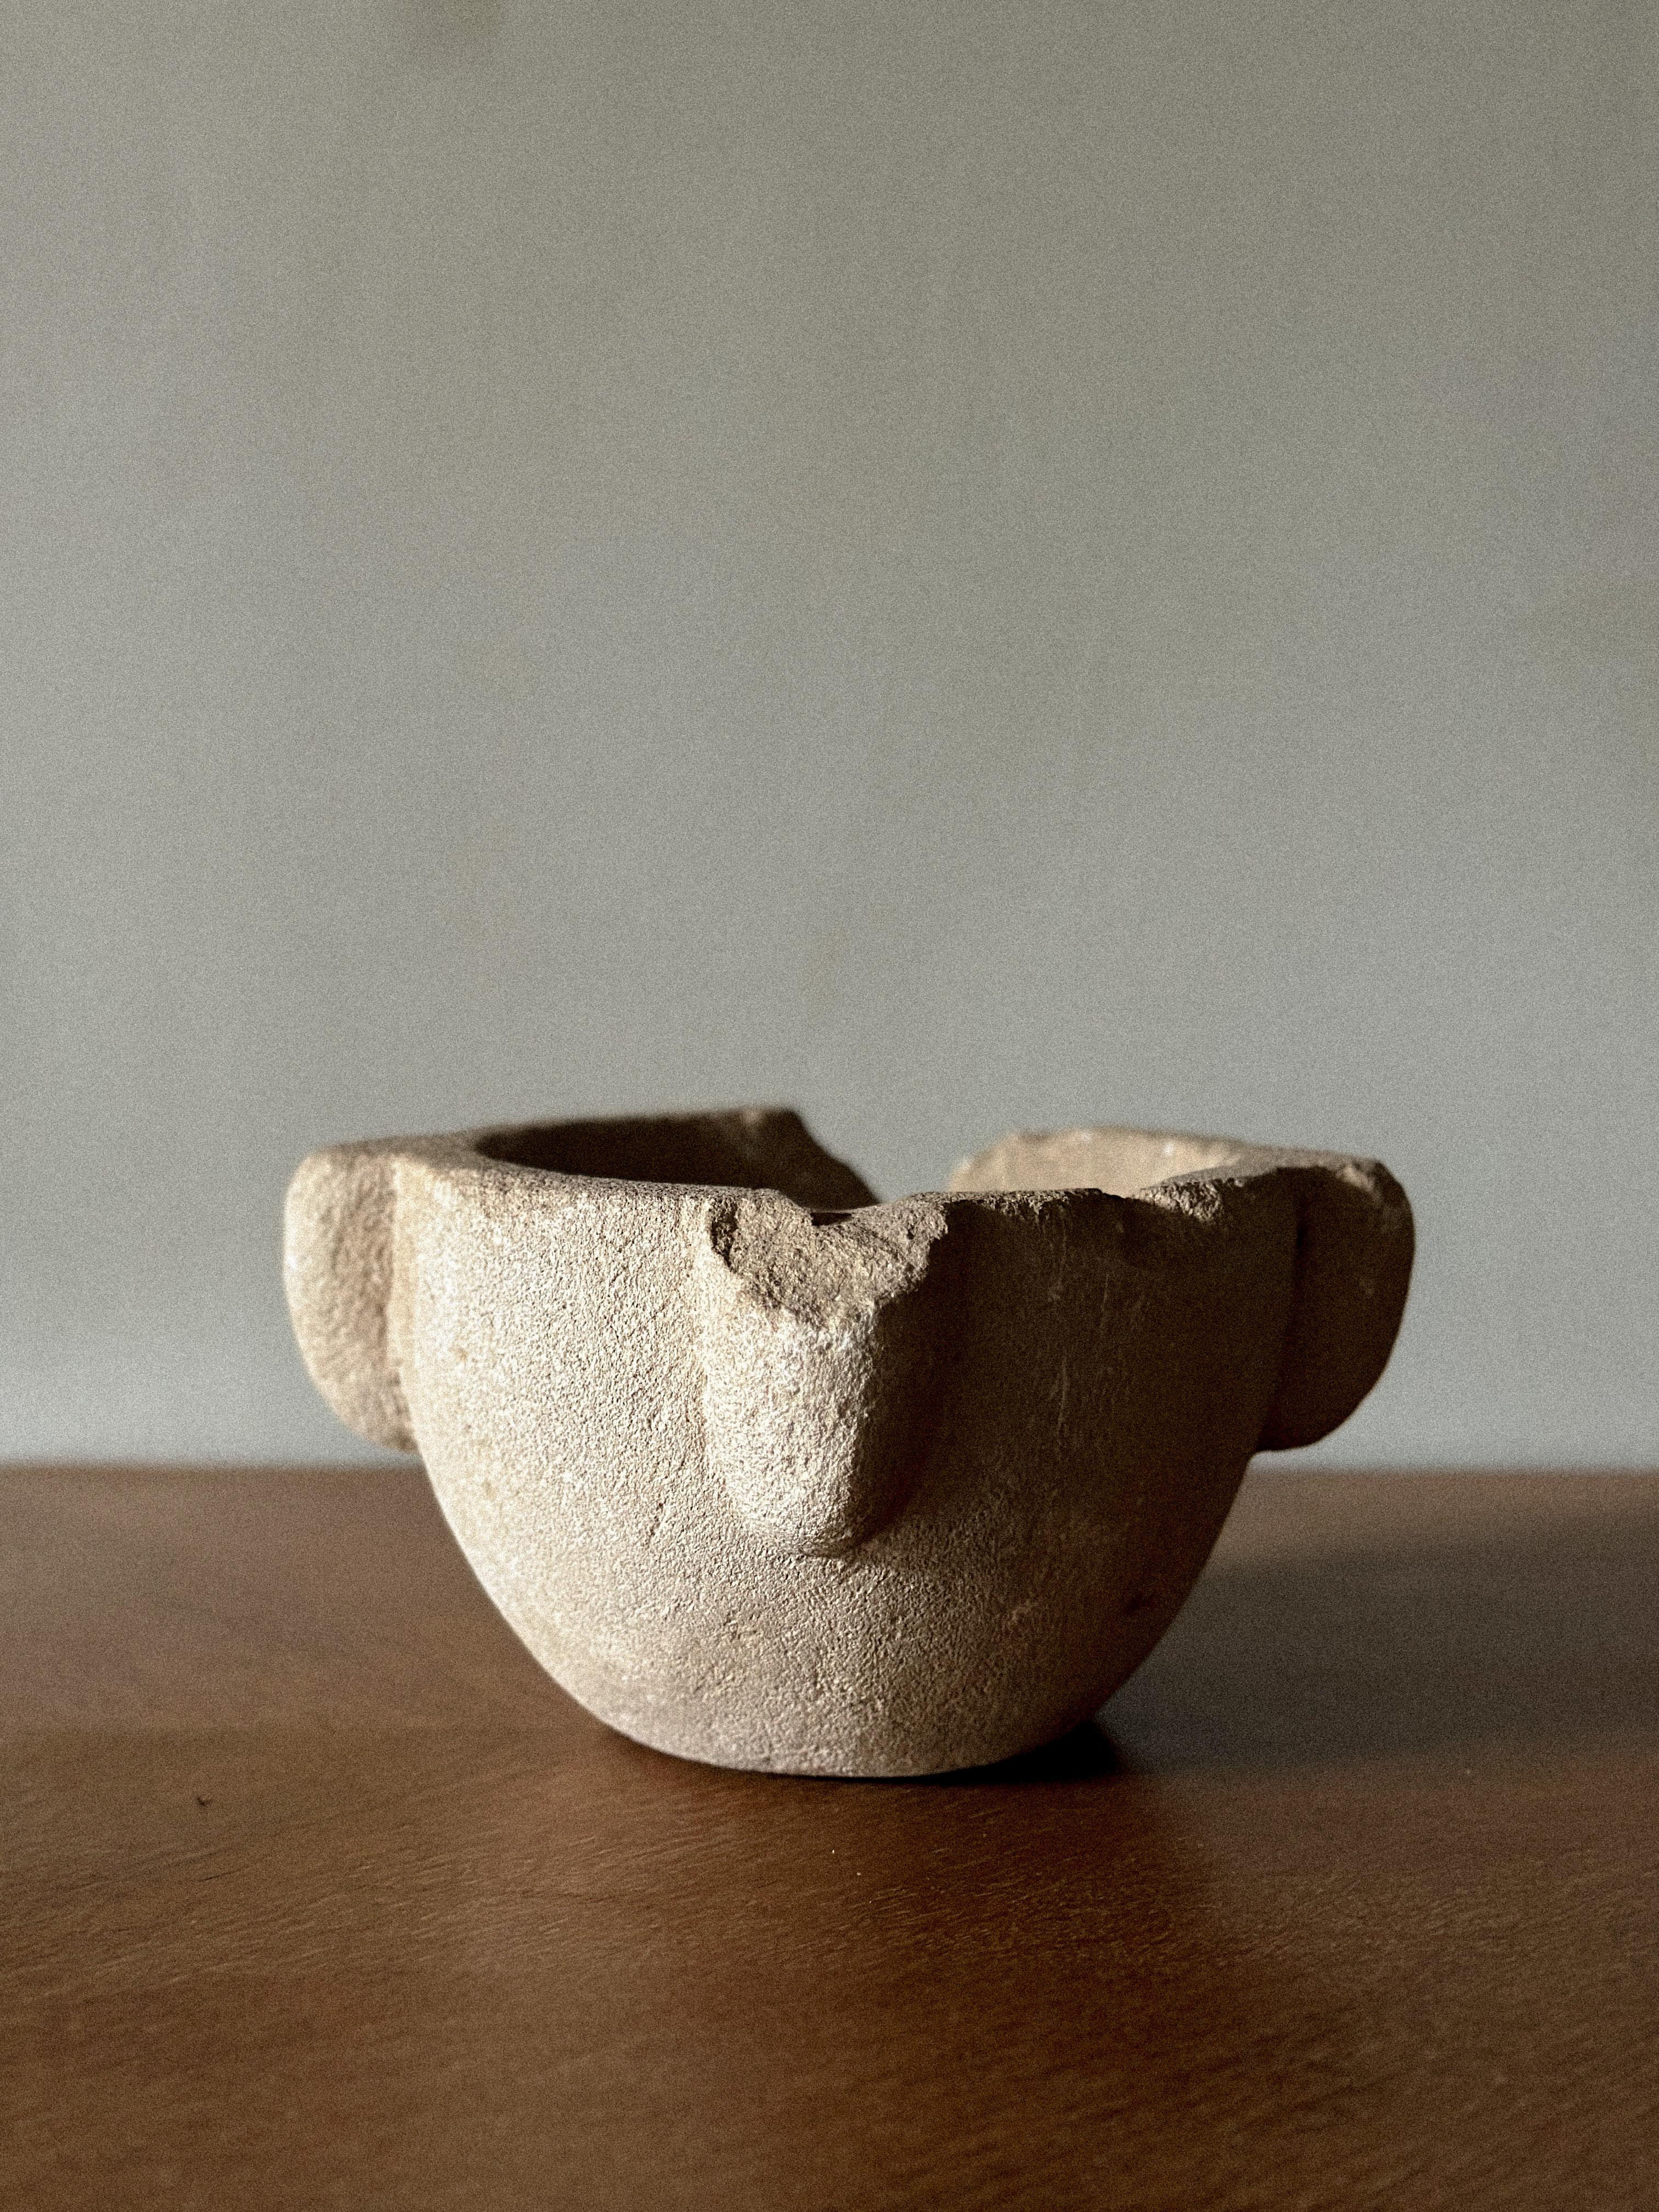 A Primitive Wabi Sabi Hand-Carved Stone Mortar, Spain, Early 20th Century   In Good Condition For Sale In Hønefoss, 30